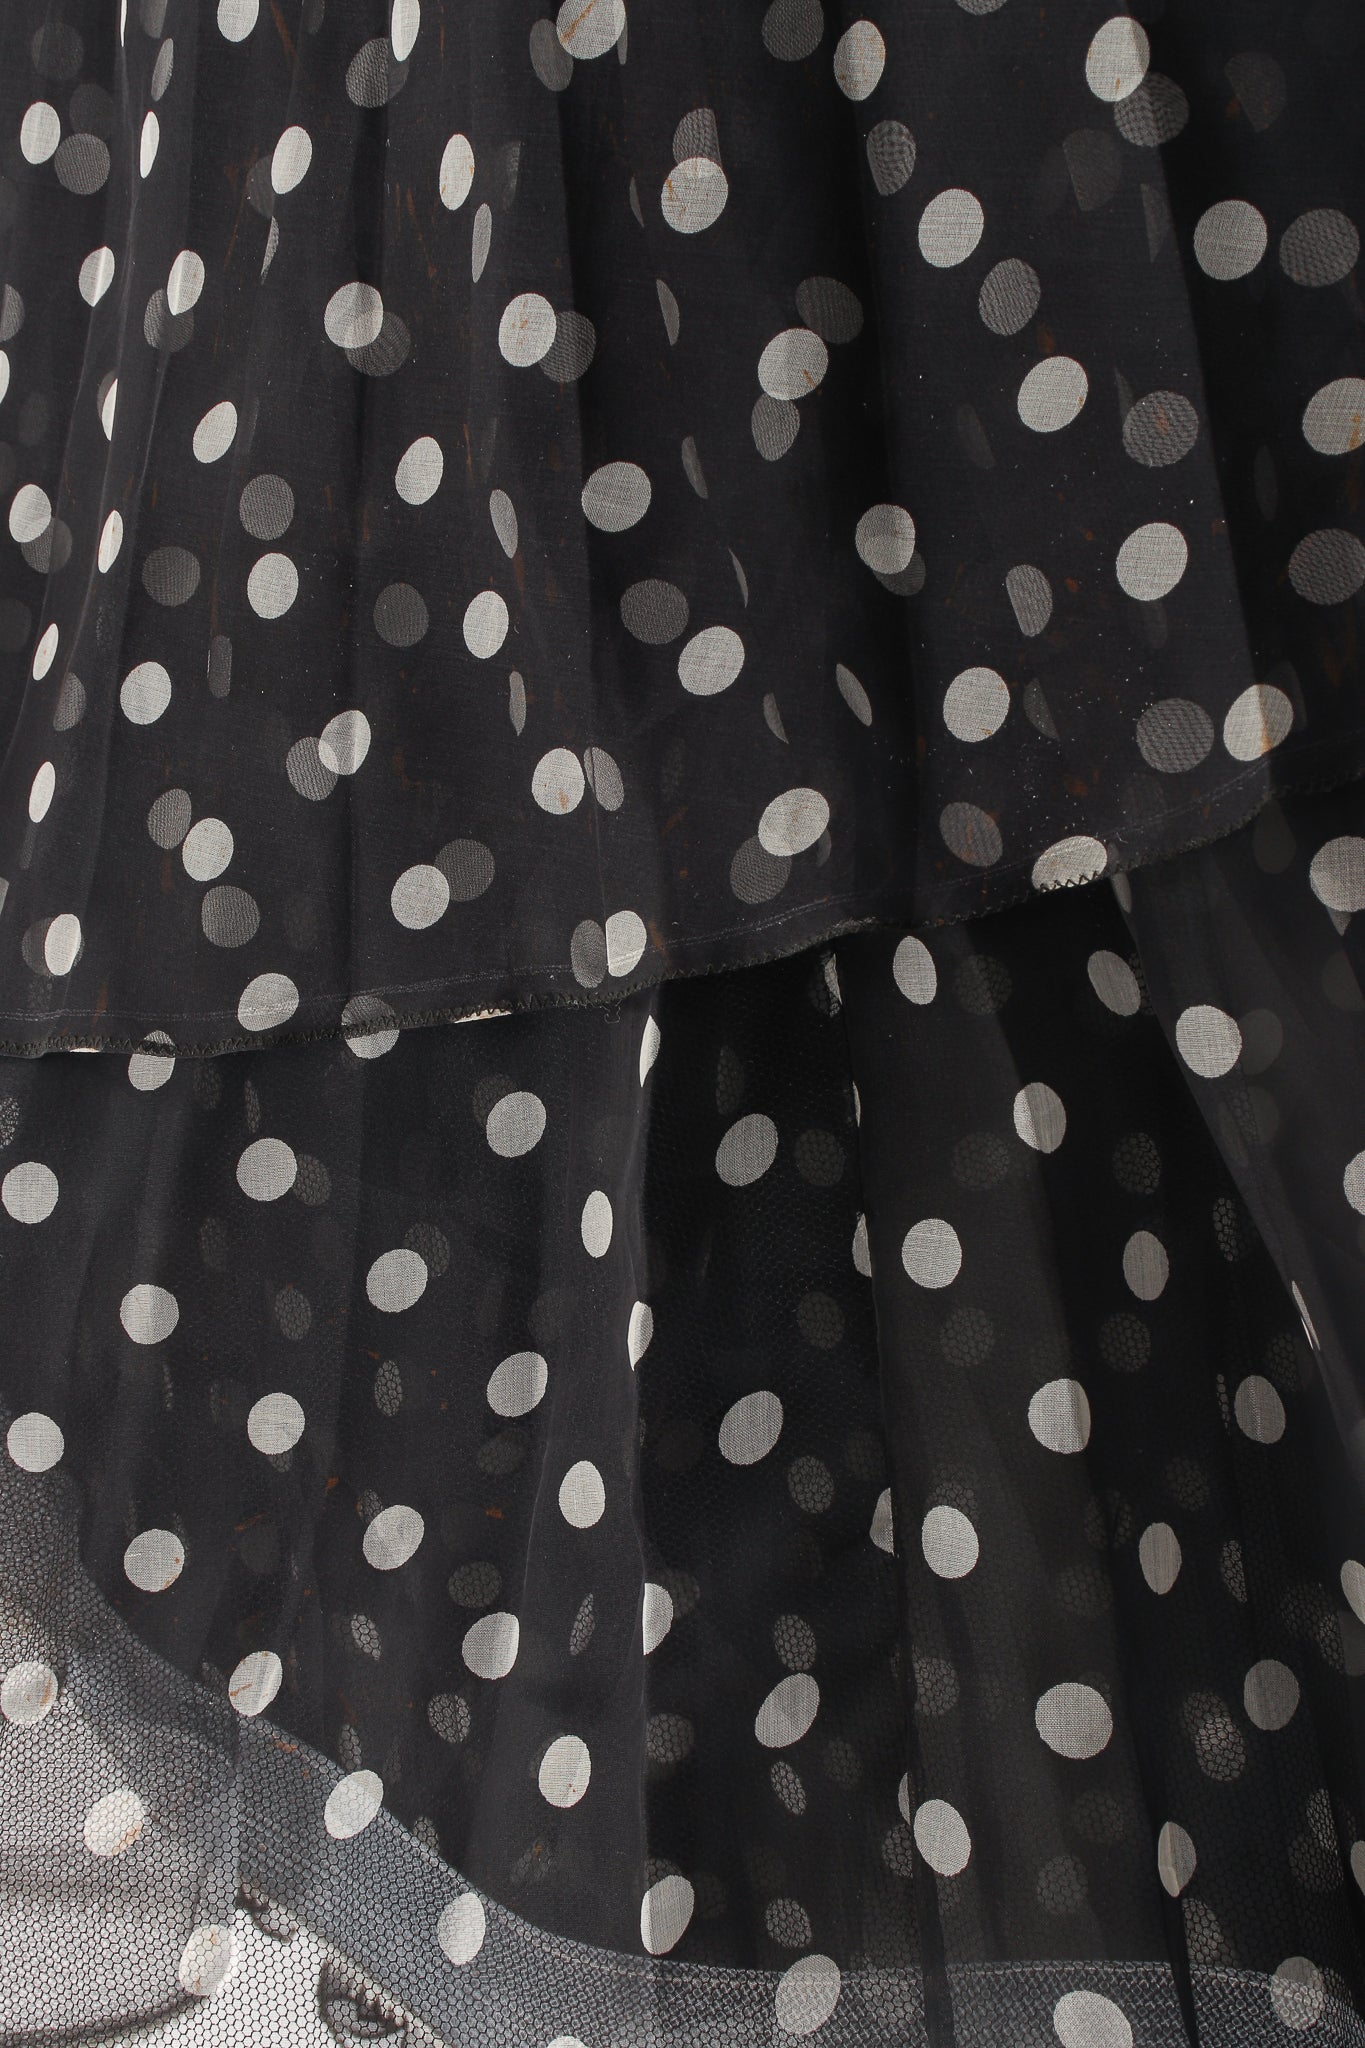 Vintage Christian Dior by Gianfranco Ferre Layered Organza Dot Skirt stain @ Recess LA